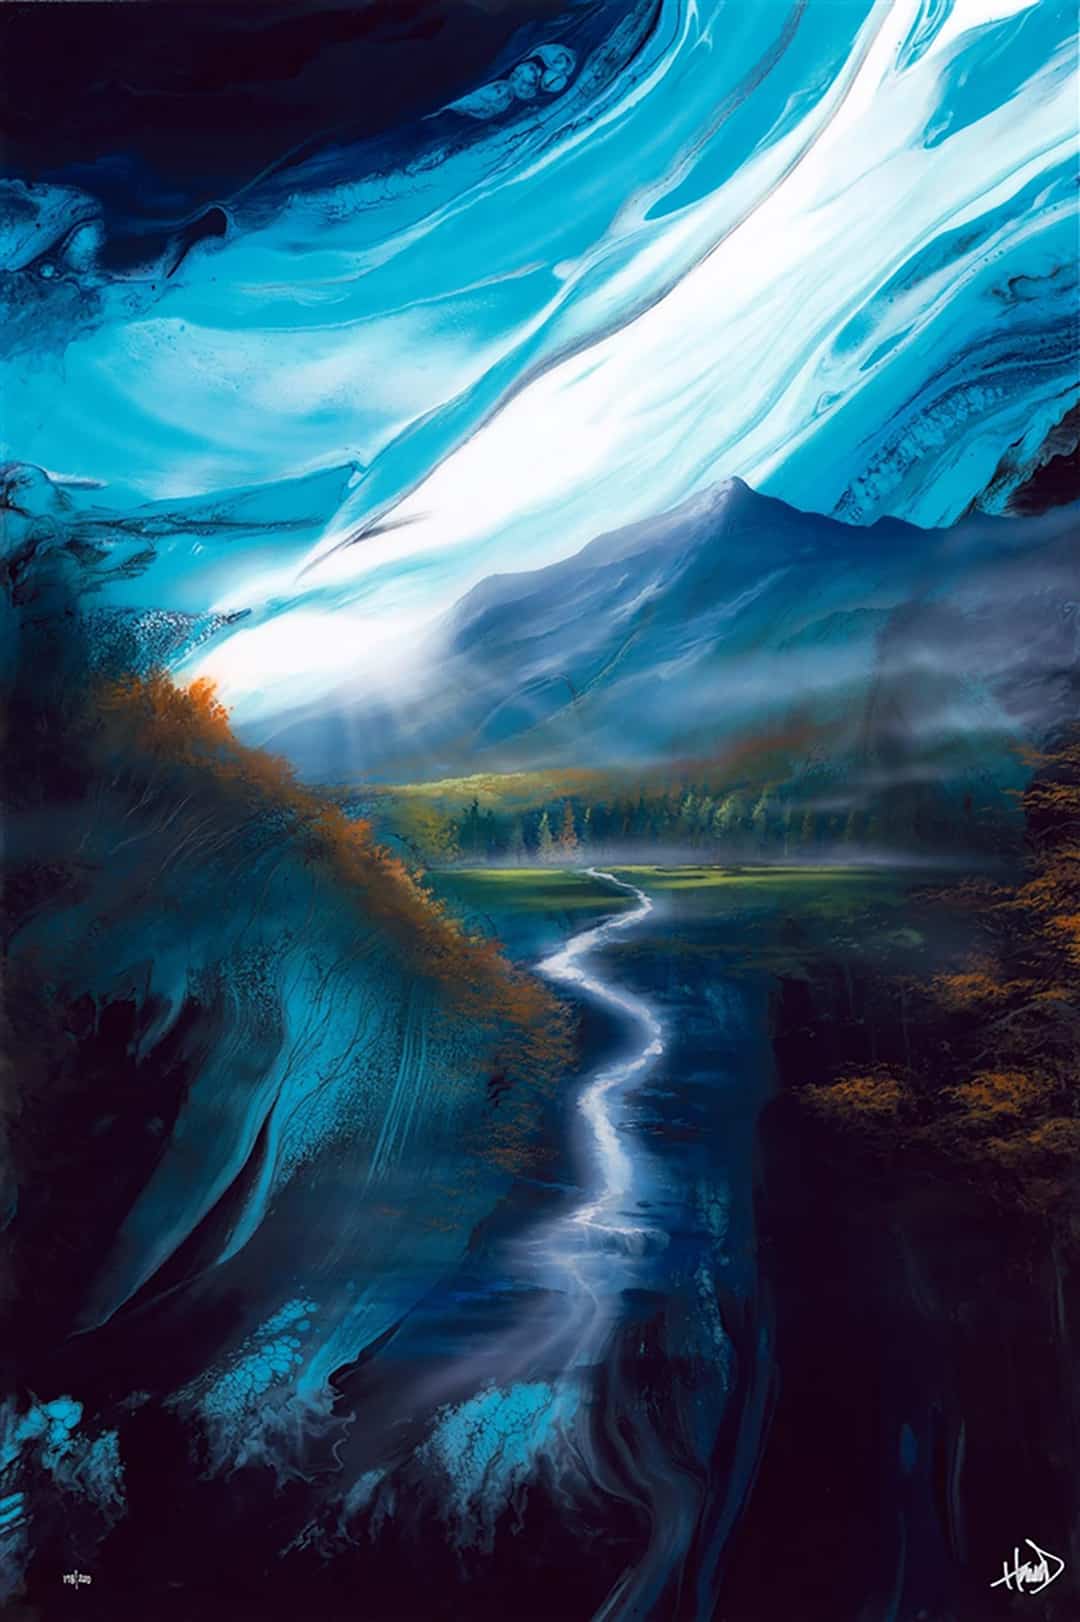 Ashton howard painting of a mountain valley with a river running through it